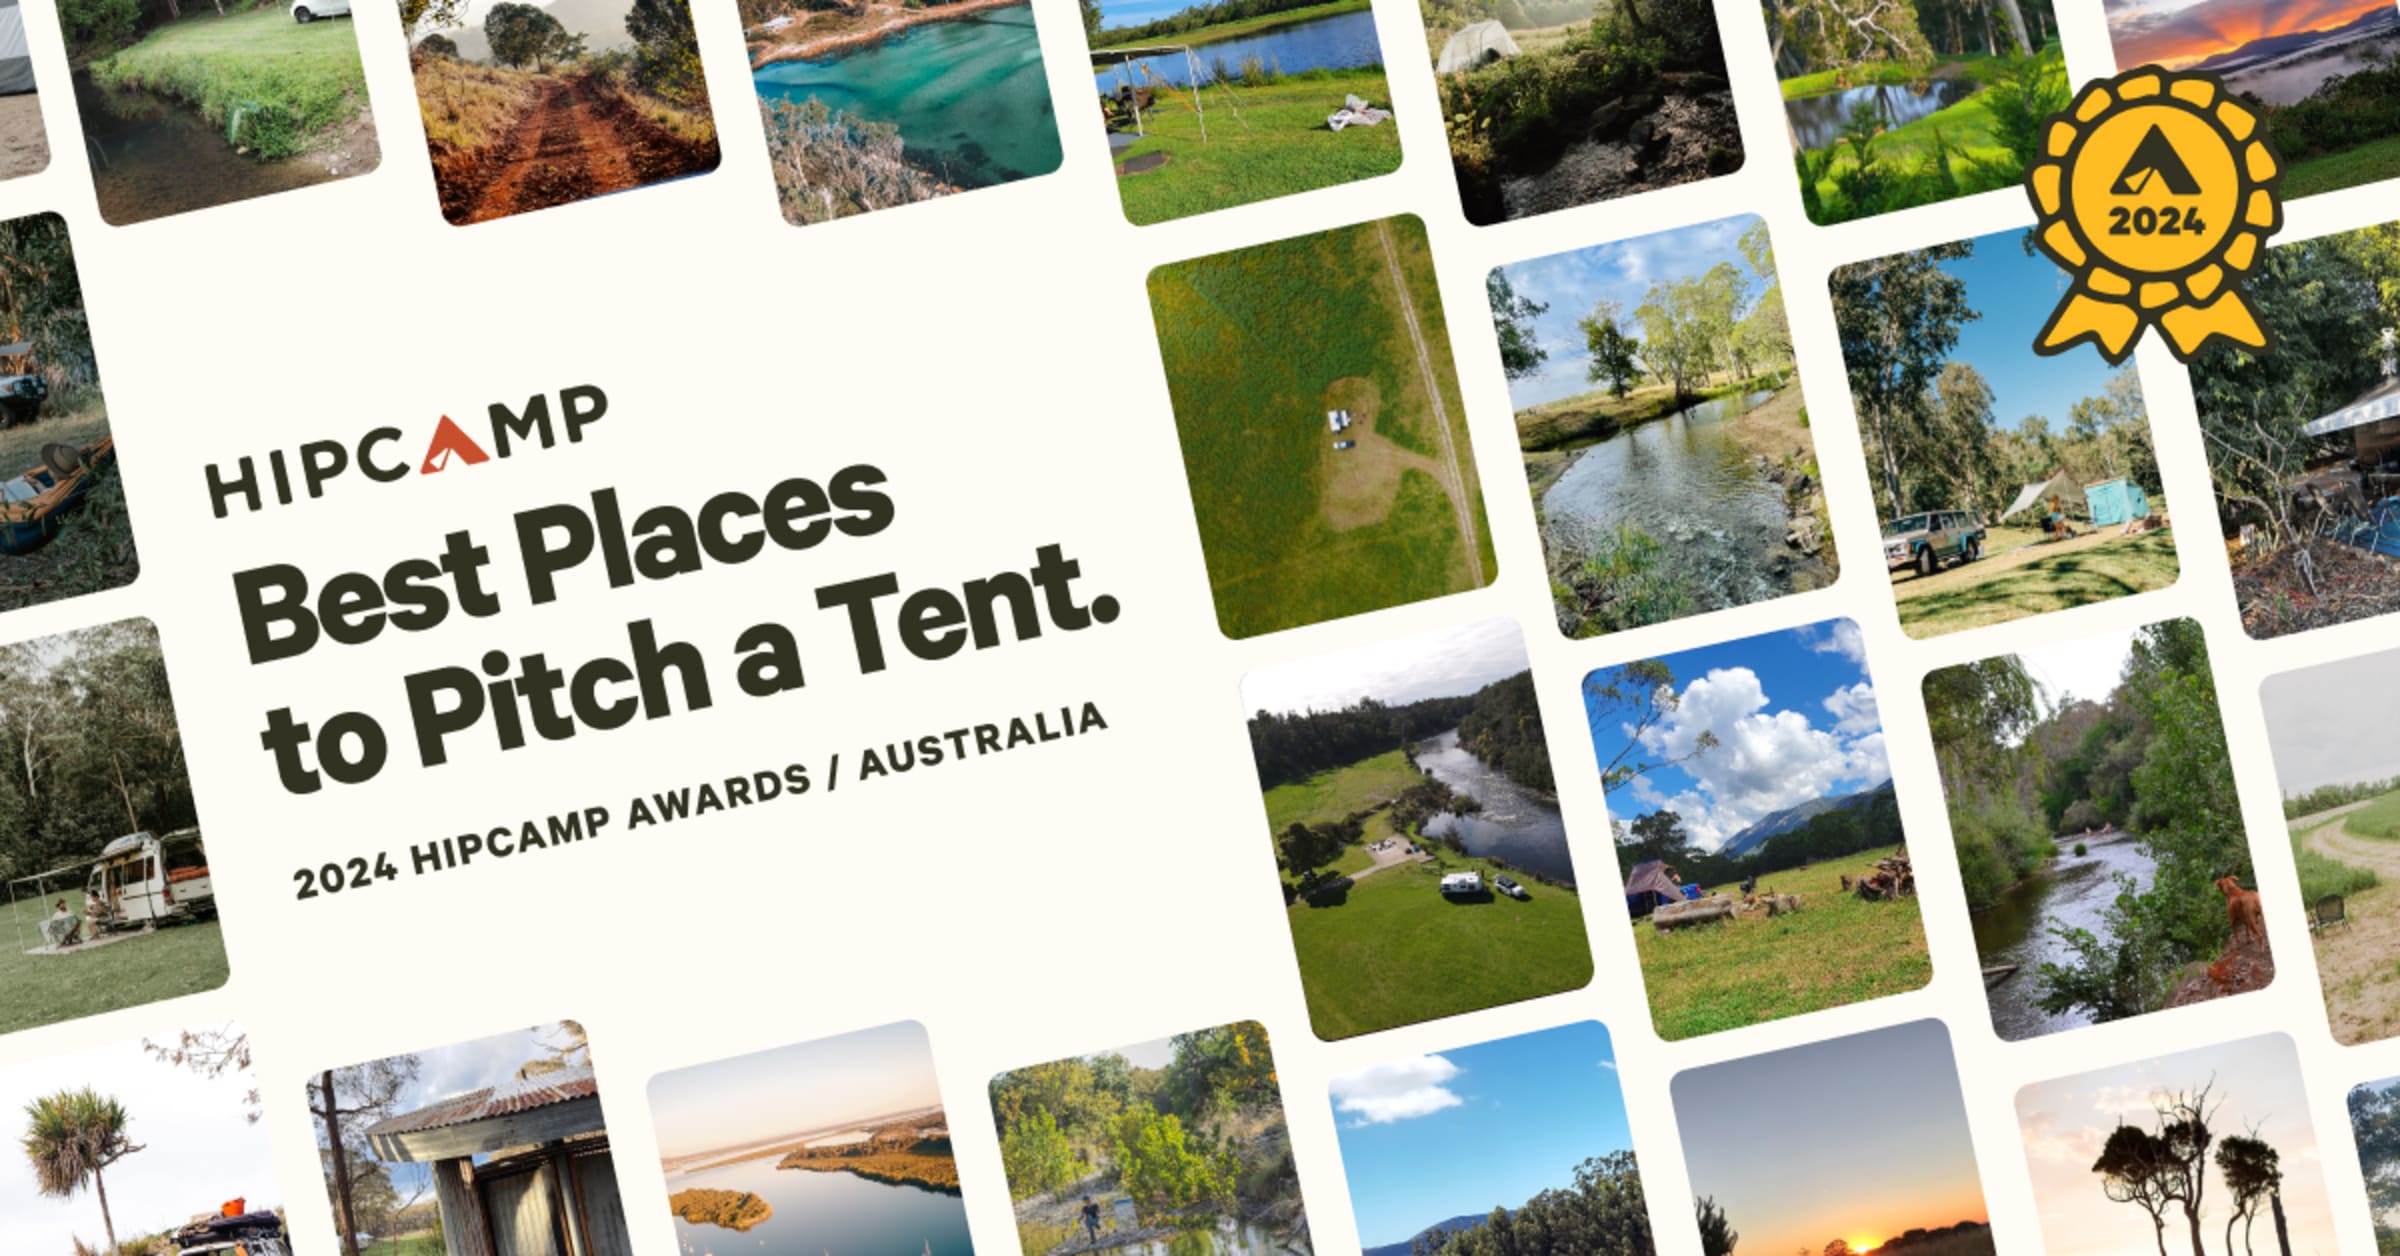 Best places to pitch a tent in Australia